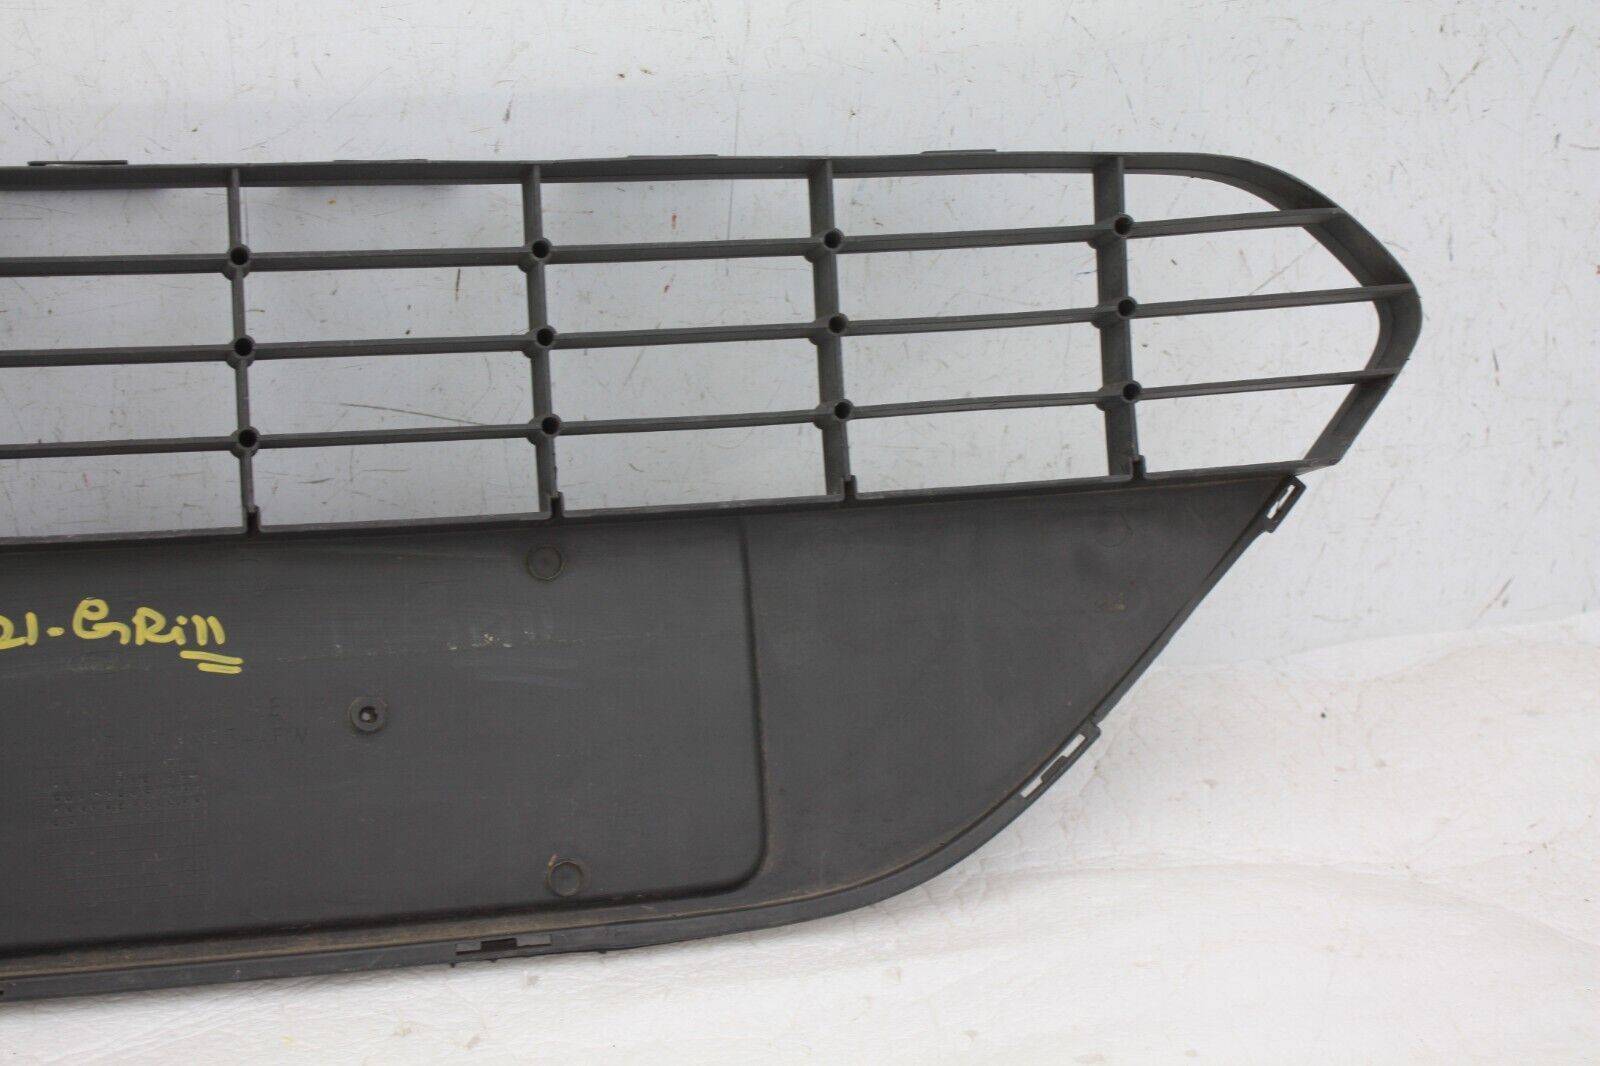 Ford-Focus-Front-Bumper-Grill-2008-TO-2011-8M51-17B968-BE-Genuine-DAMAGED-176410989719-10